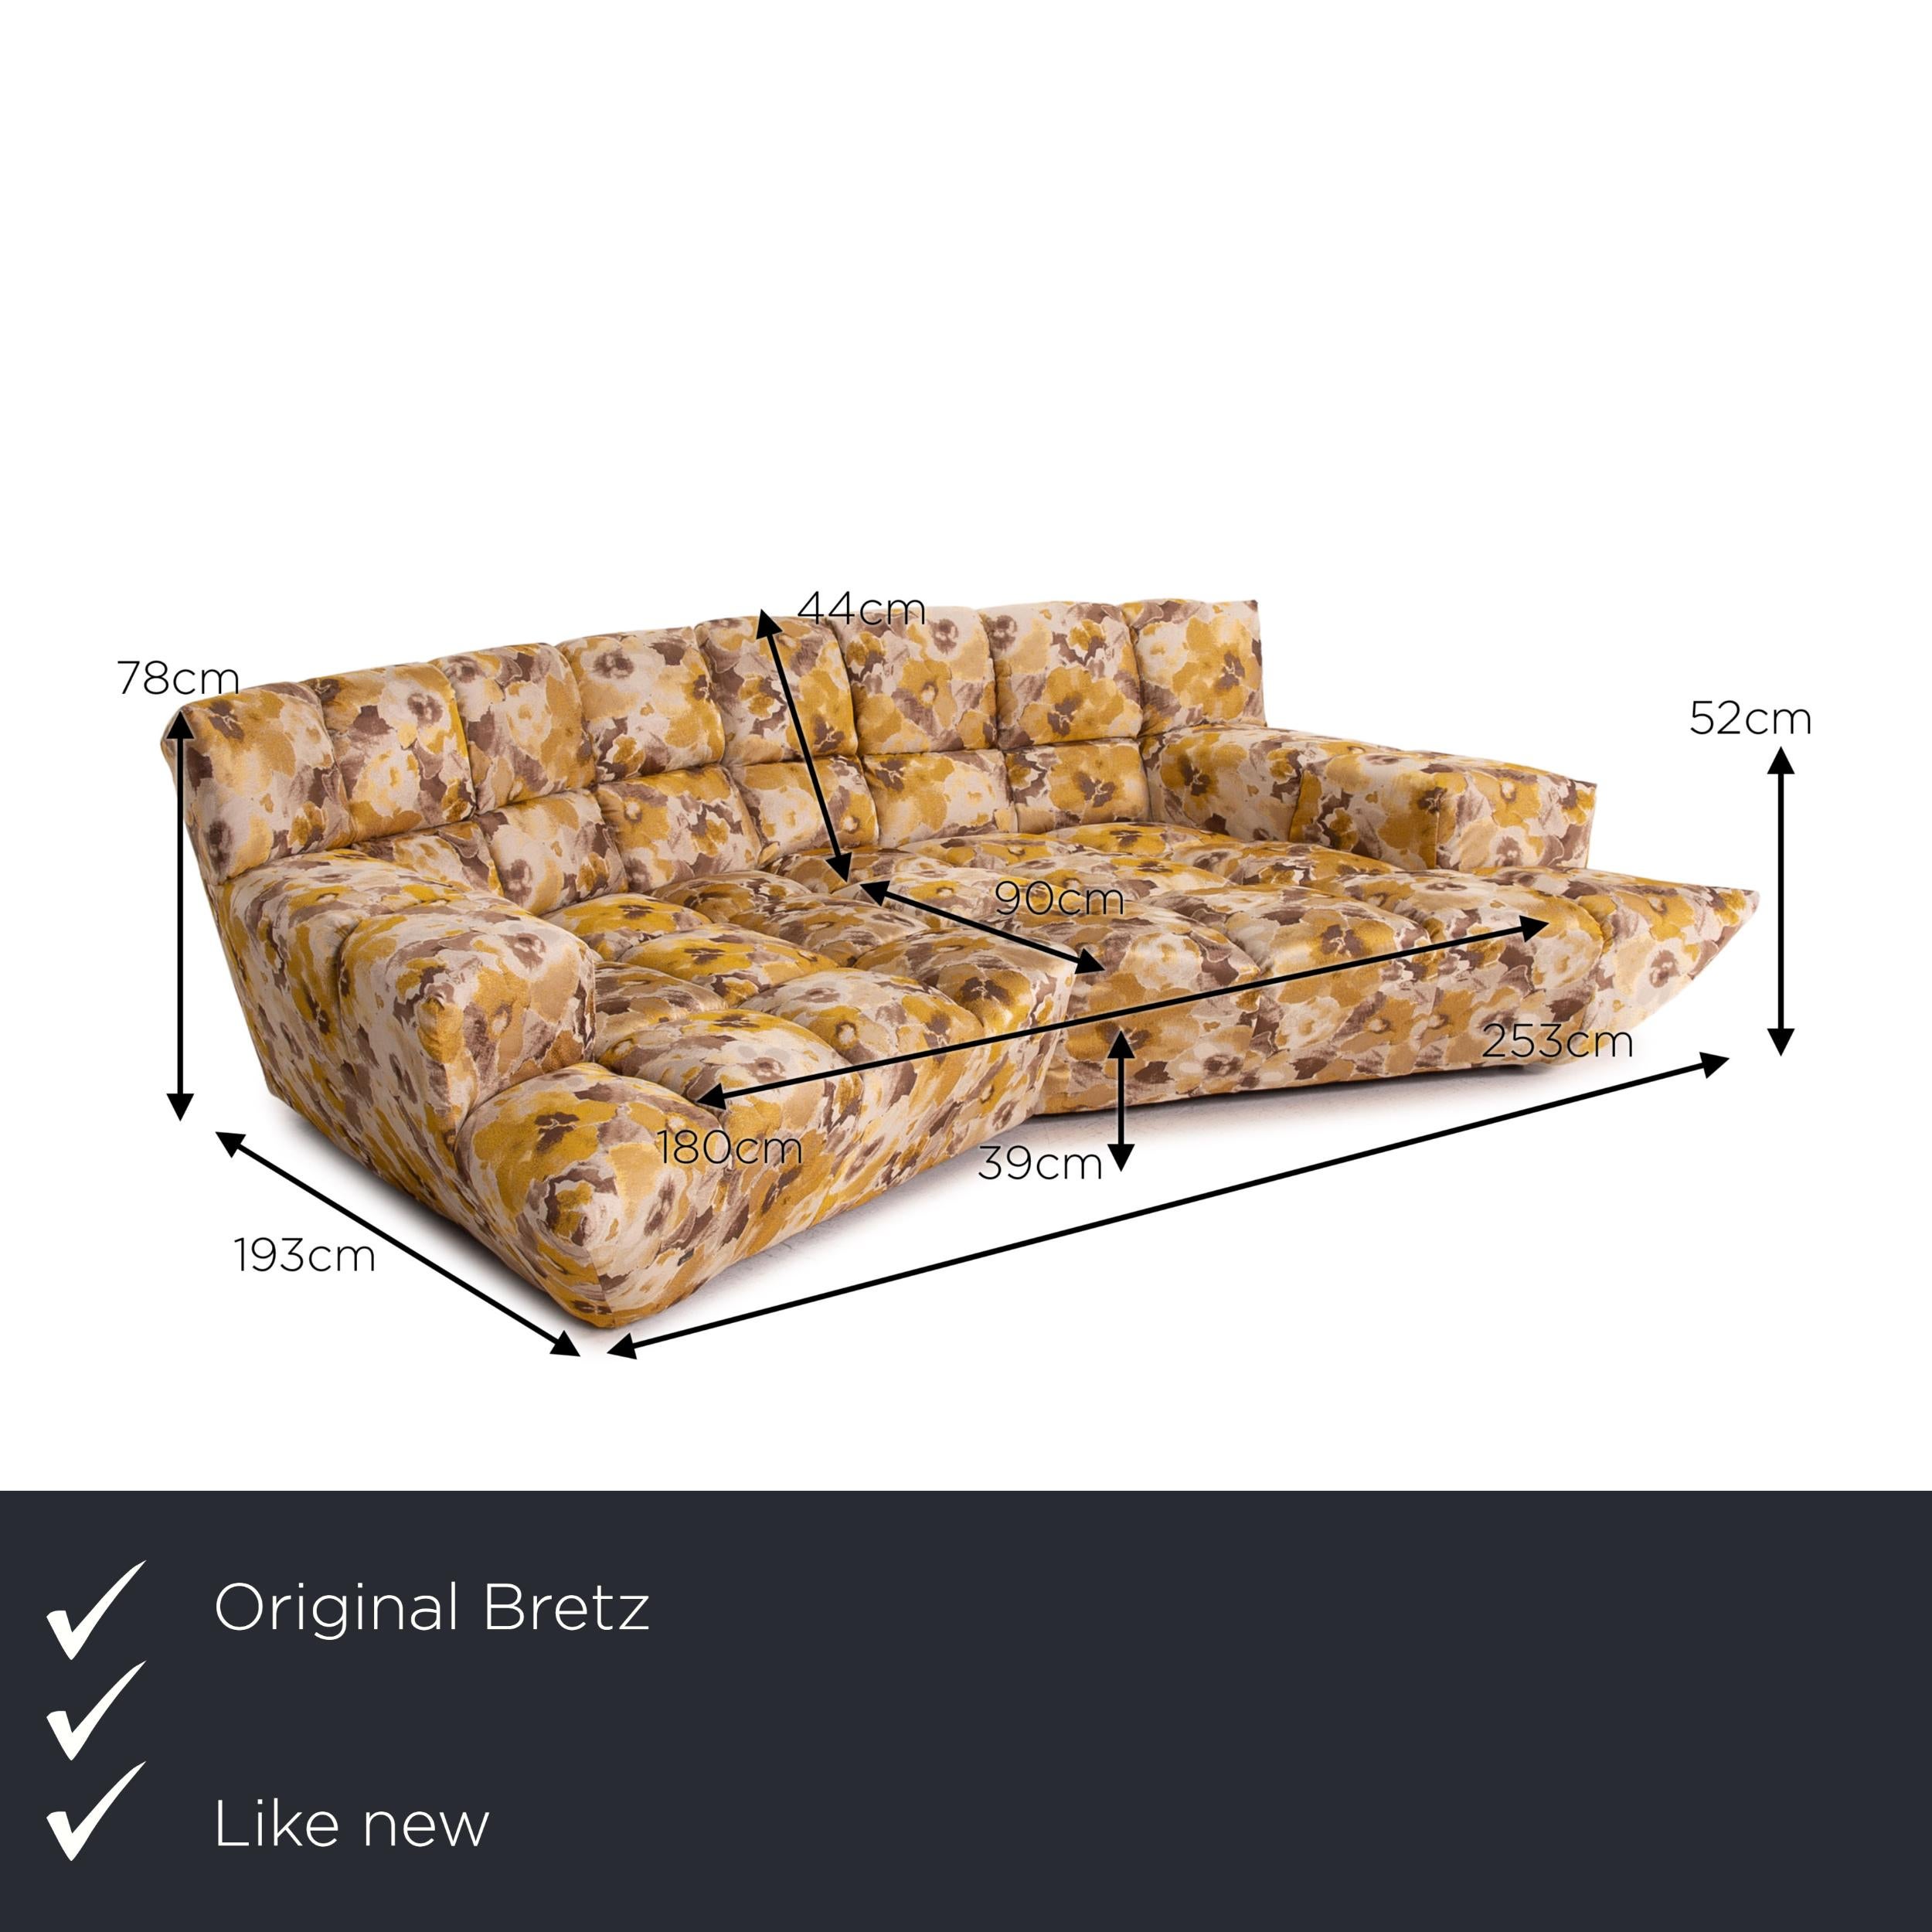 We present to you a Bretz Cloud 7 Velvet fabric corner sofa yellow gold brown sofa couch modular.
 

 Product measurements in centimeters:
 

Depth: 193
Width: 253
Height: 78
Seat height: 39
Rest height: 52
Seat depth: 90
Seat width: